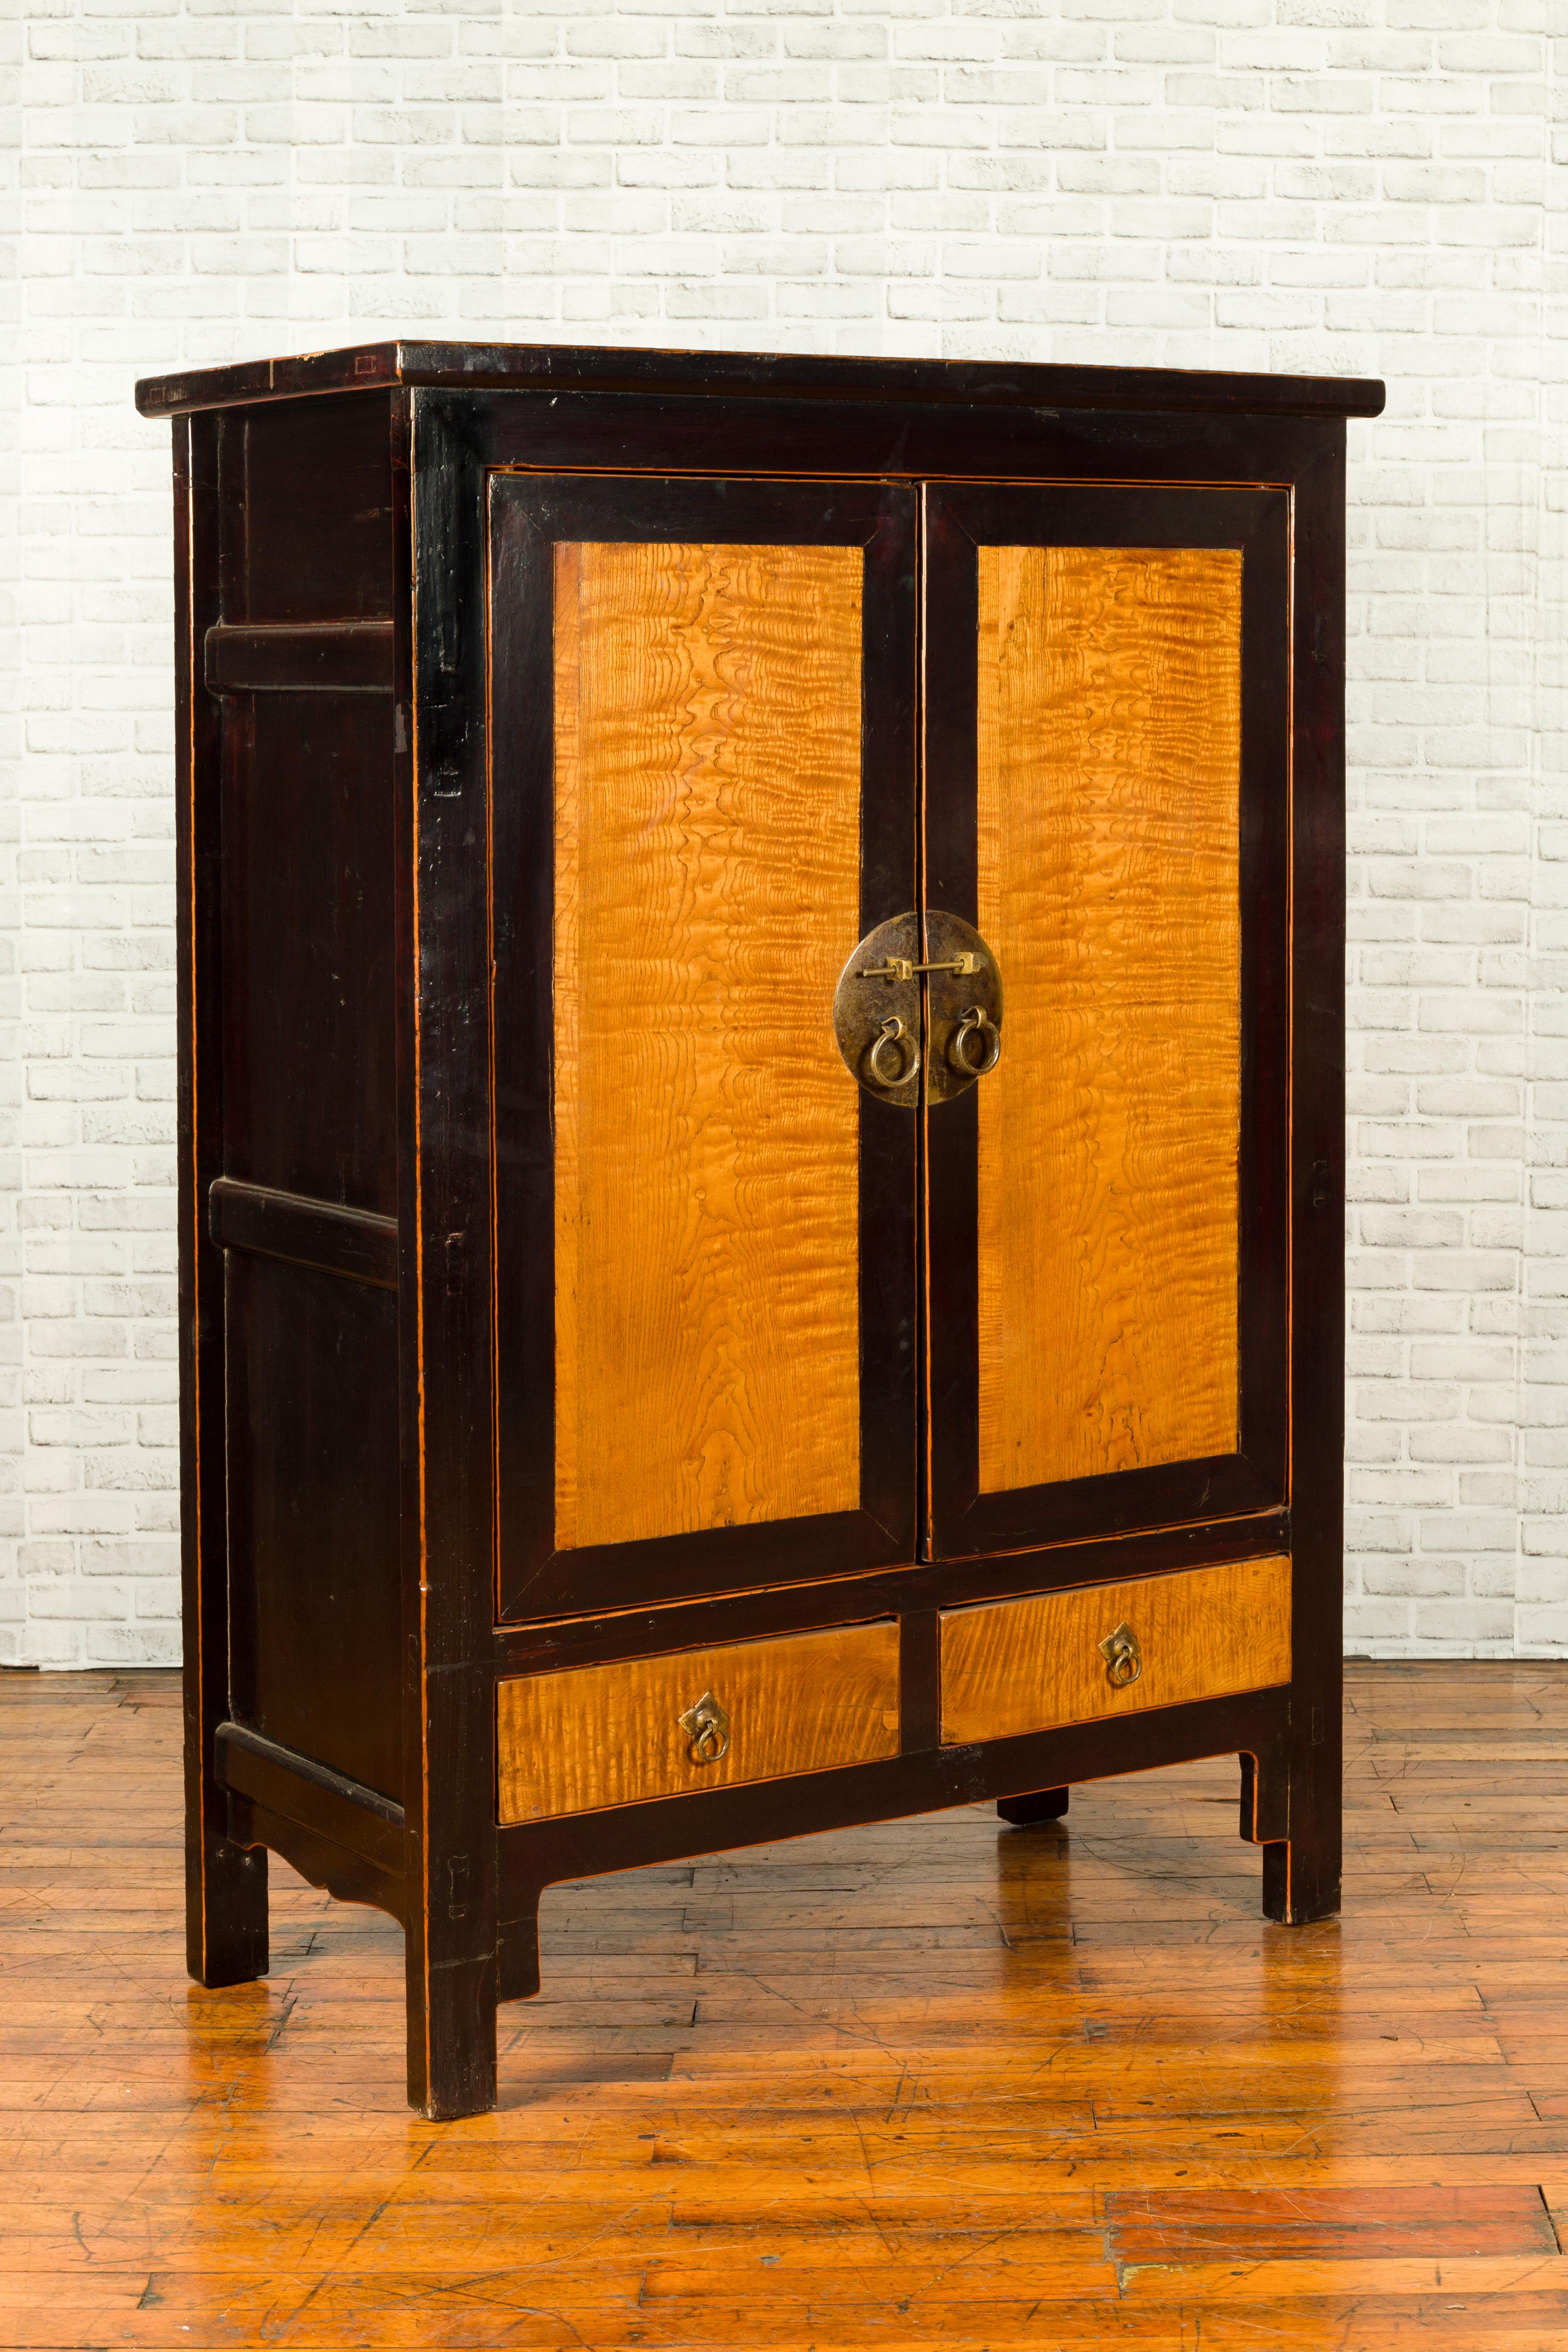 A Chinese black cabinet from the 19th century, with inset burl wood panels, drawers and brass medallion. Created in China during the 19th century, this cabinet captures our attention with its contrasting colors and linear silhouette. Two doors,